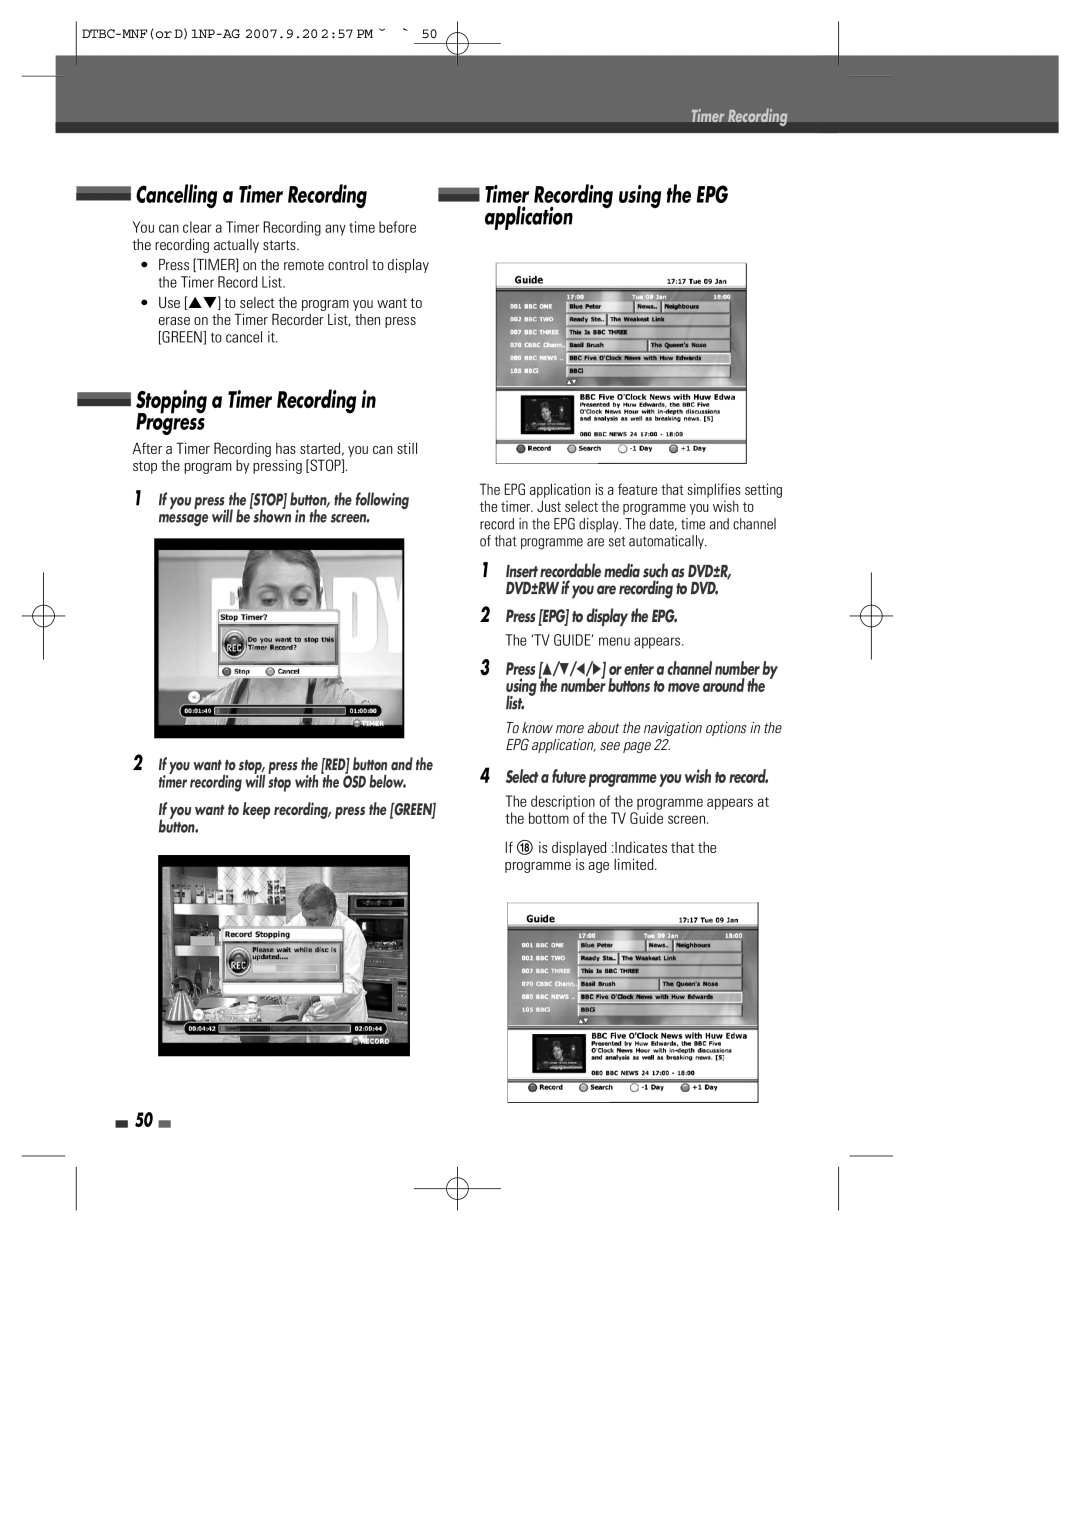 Daewoo DRVT-43, DRVT-40 instruction manual Cancelling a Timer Recording, Timer Recording using the EPG application 